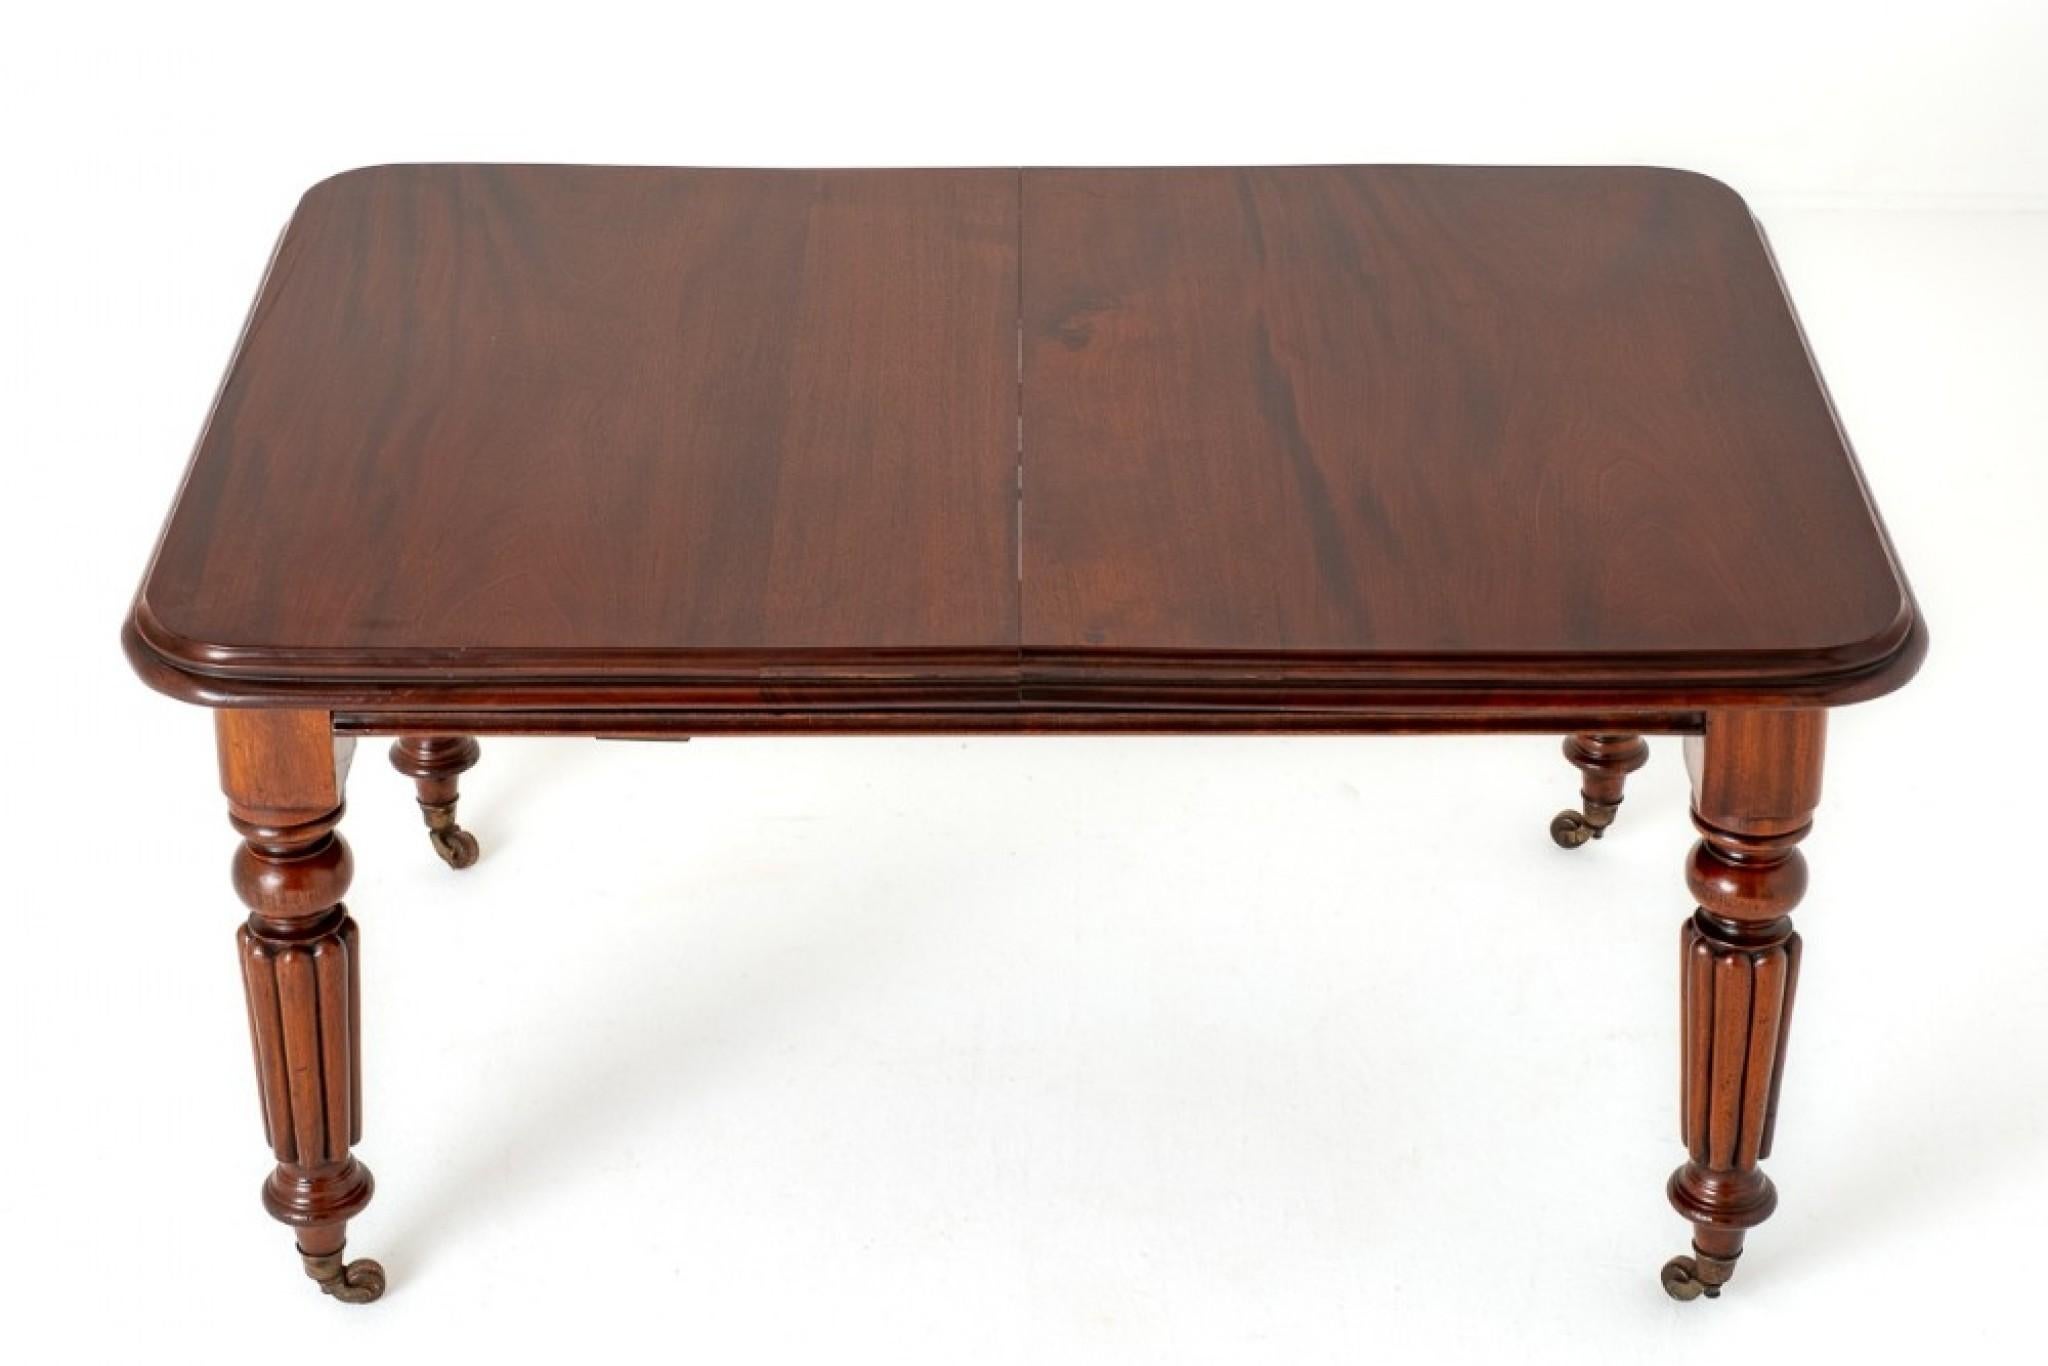 Mid-19th Century Mahogany Dining Table Victorian Extending Two Leaf 1860 For Sale